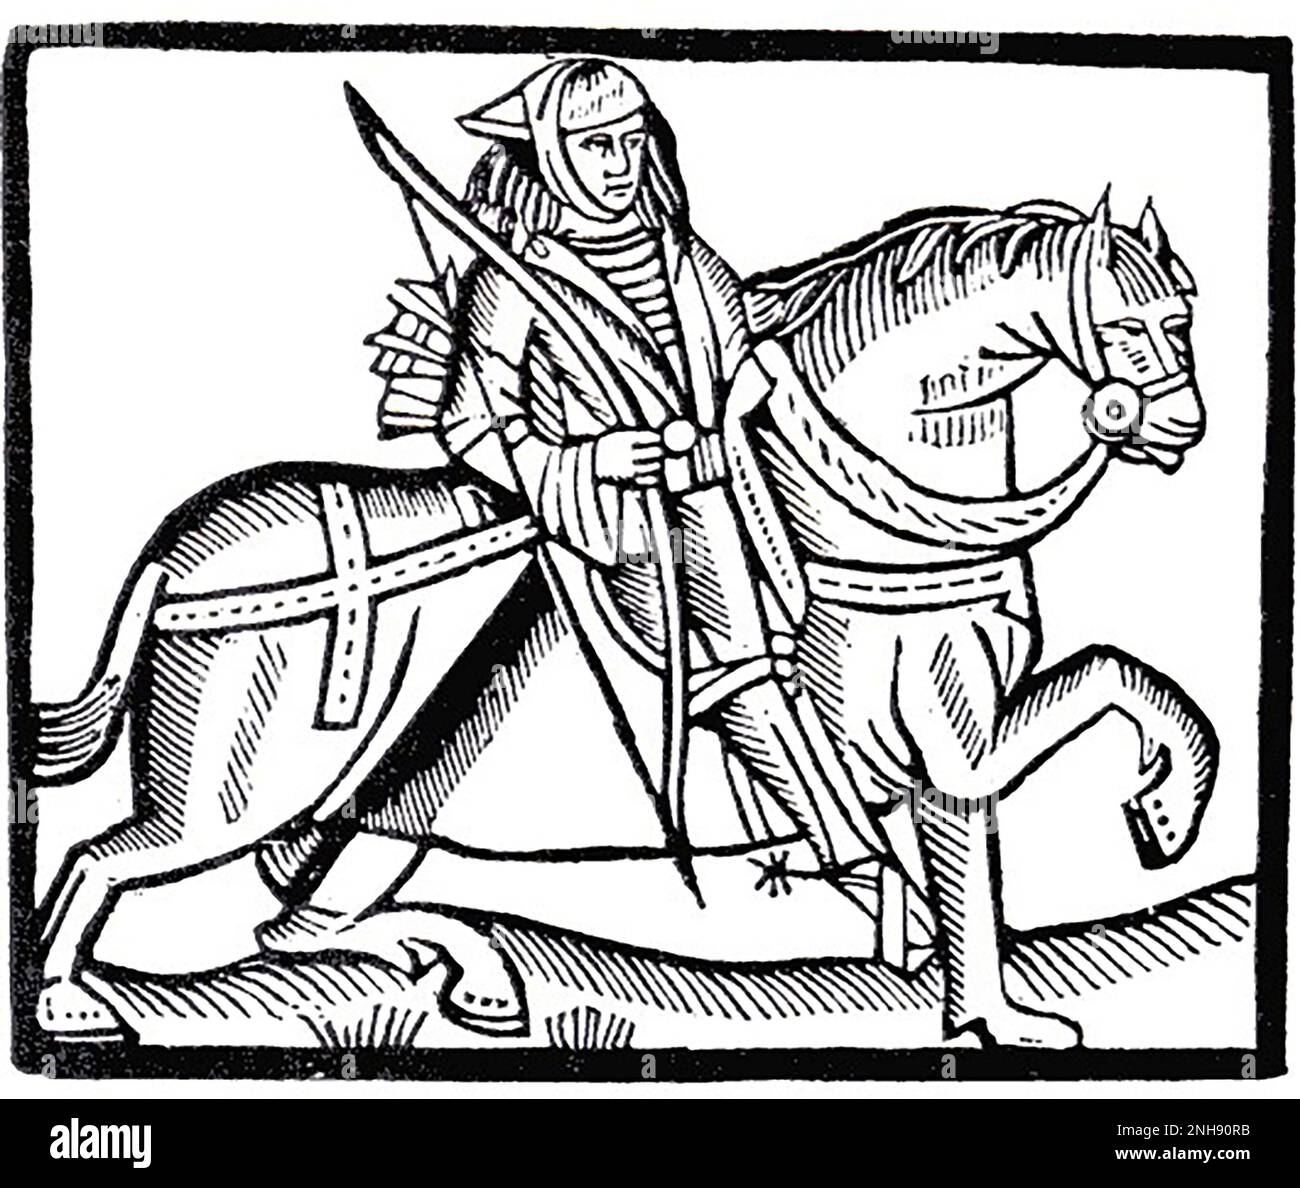 Robin Hood on a horse, illustration from The Play of Robin Hood and the Sheriff, c. 1475. Robin Hood was a popular folk figure in the Late Middle Ages, who is said to have robbed from the rich and given to the poor. The earliest known ballads featuring him are from the 15th century. Stock Photo